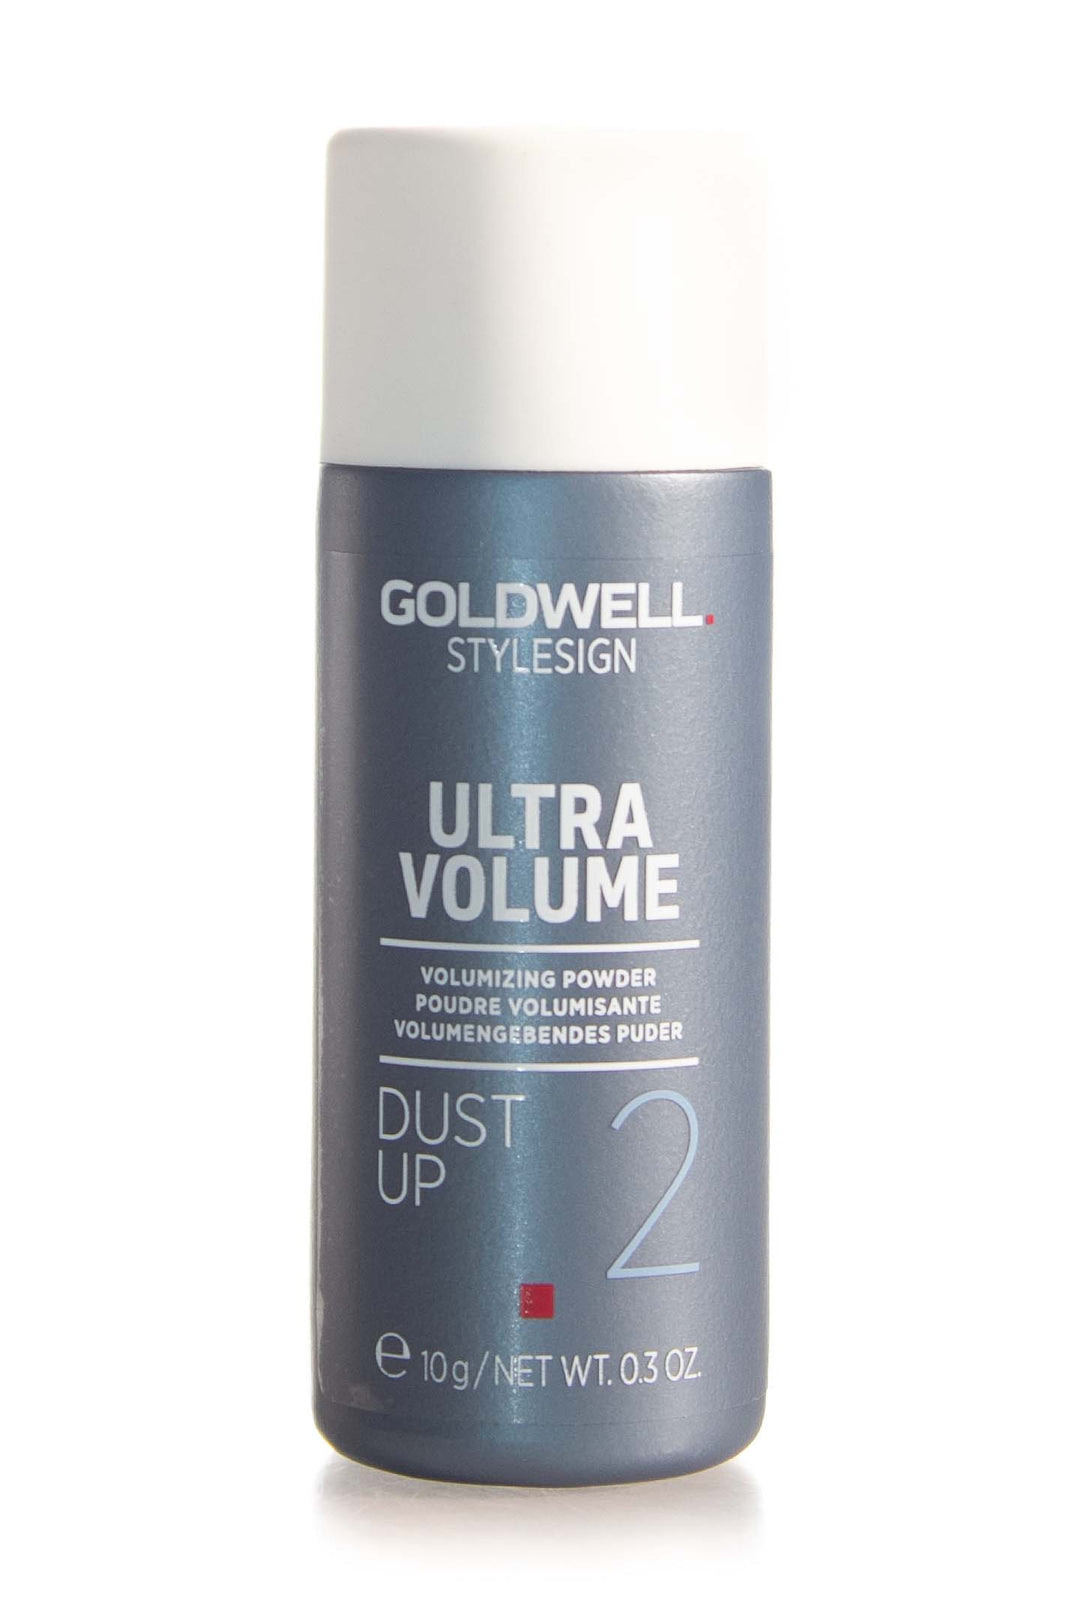 Product Image: Goldwell Ultra Volume Dust Up - 10g